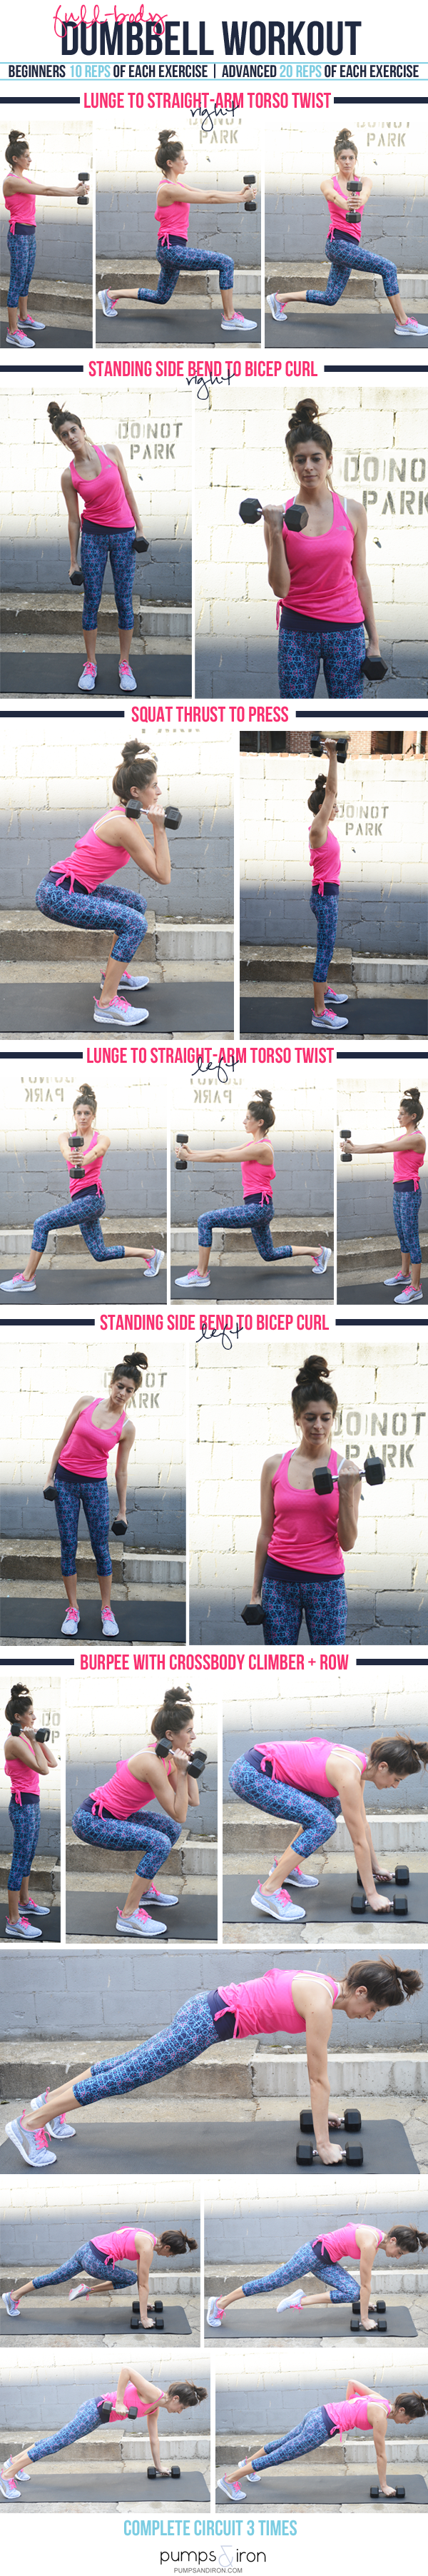 Full-Body Dumbbell Workout with Compound Exercises